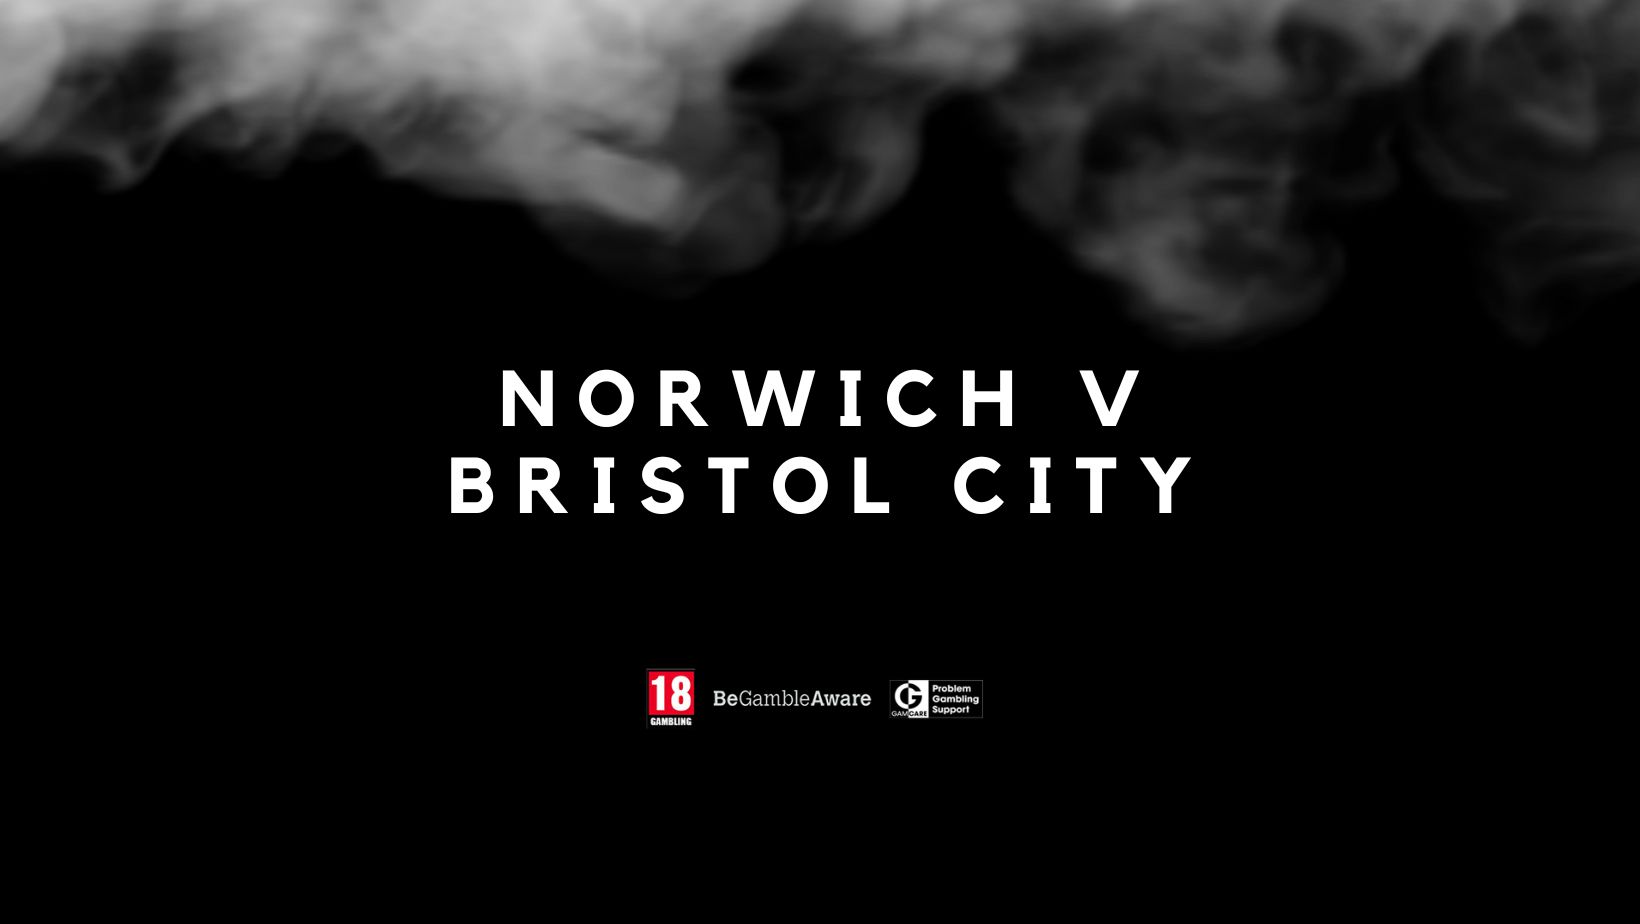 Norwich v Bristol City live streaming – where to watch on TV